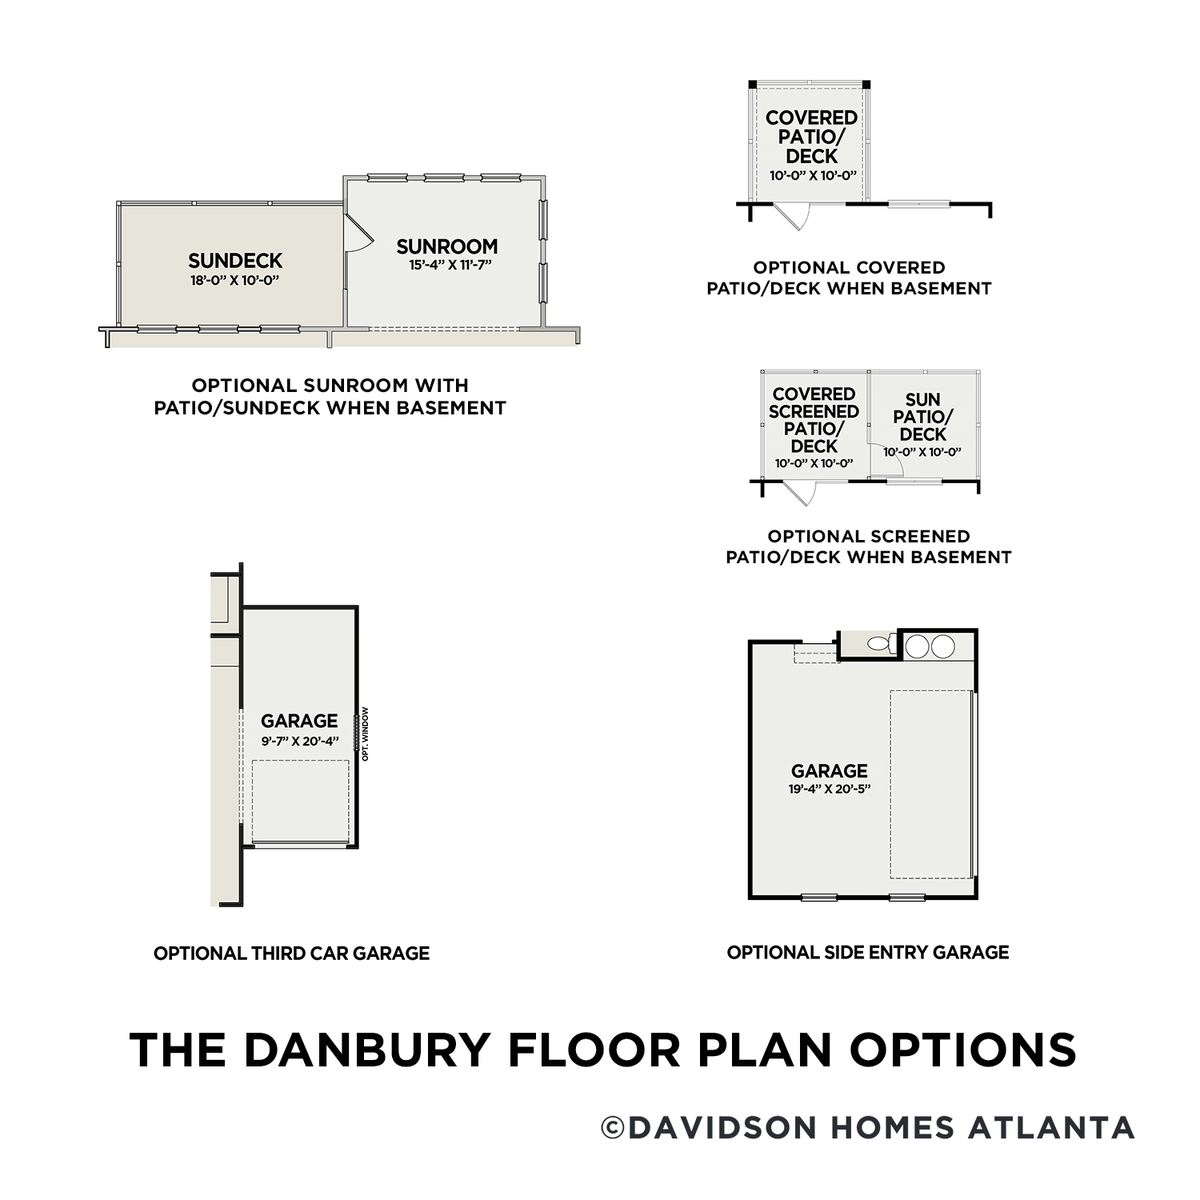 4 - The Danbury C floor plan layout for 5130 Shipley Avenue in Davidson Homes' Cooper Place community.